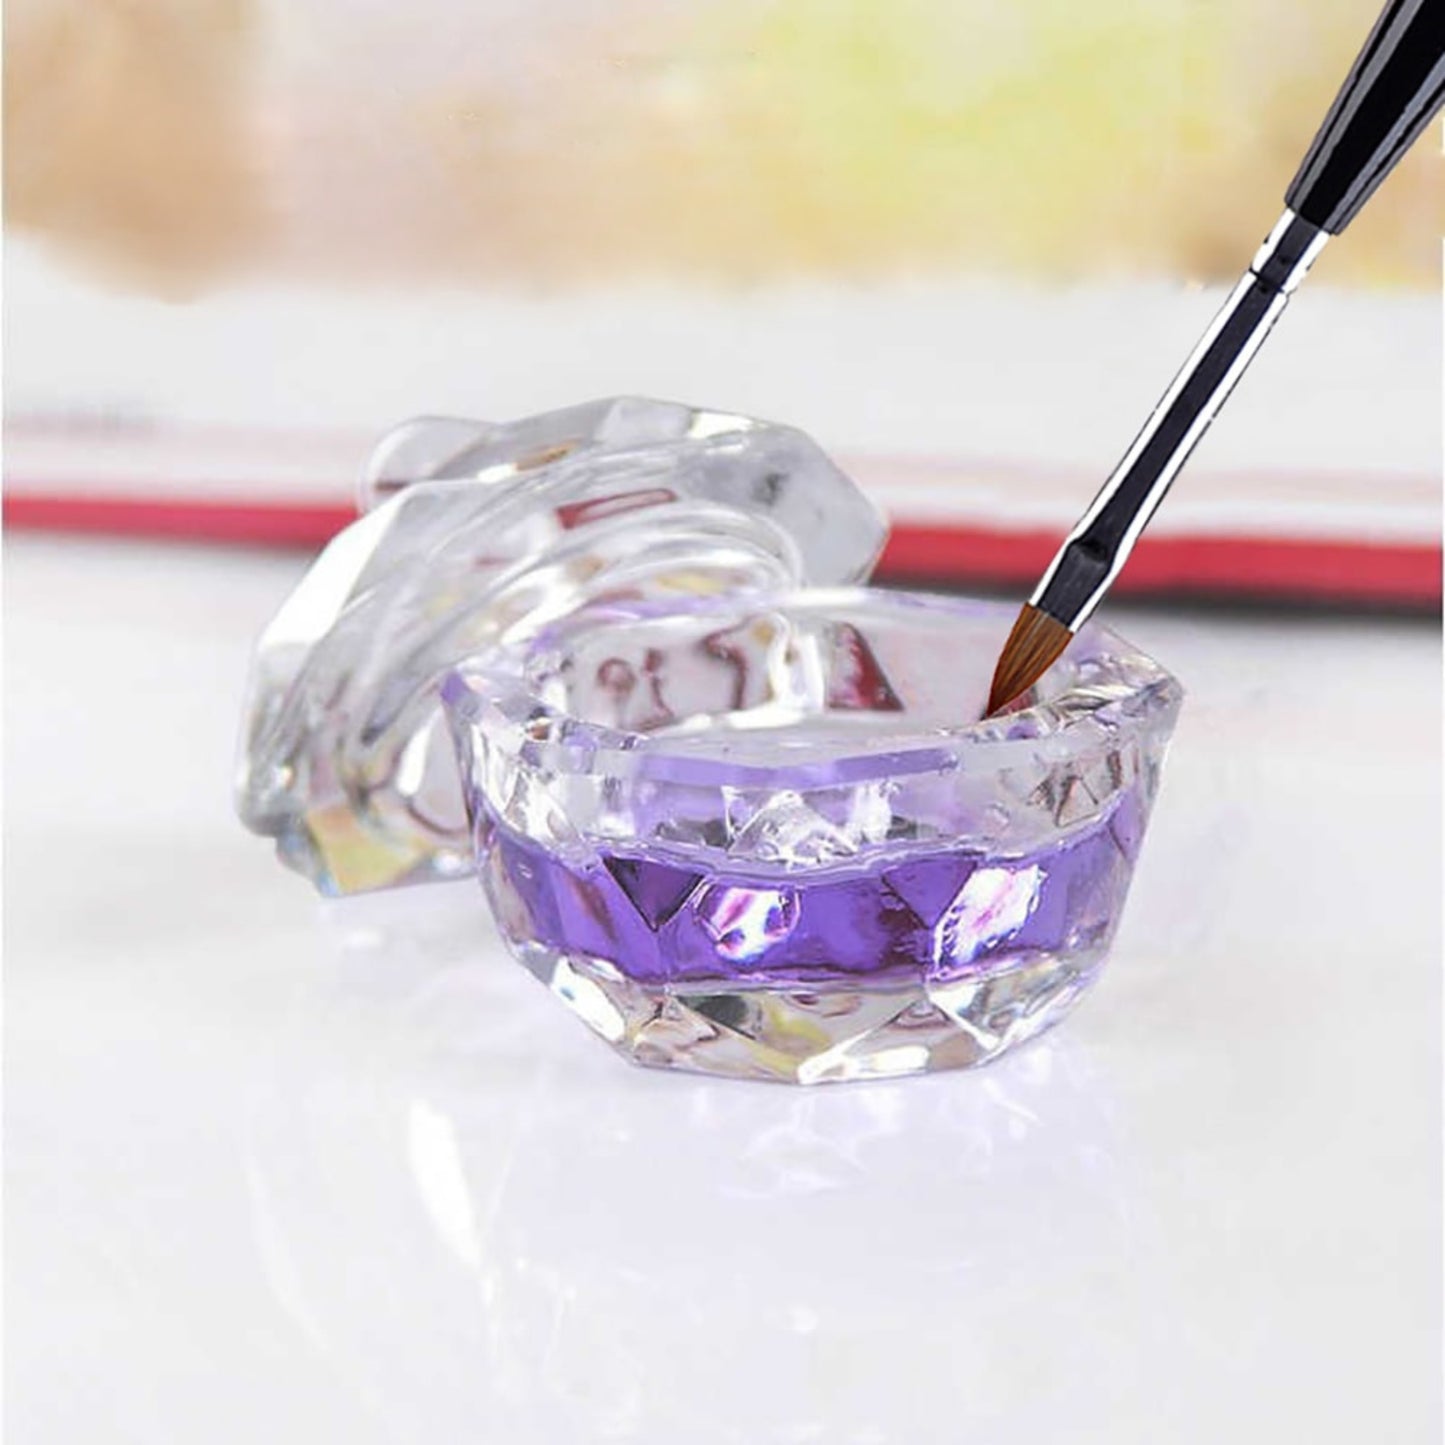 Kwen Pro Crystal jar with cap - kdh cosmetic